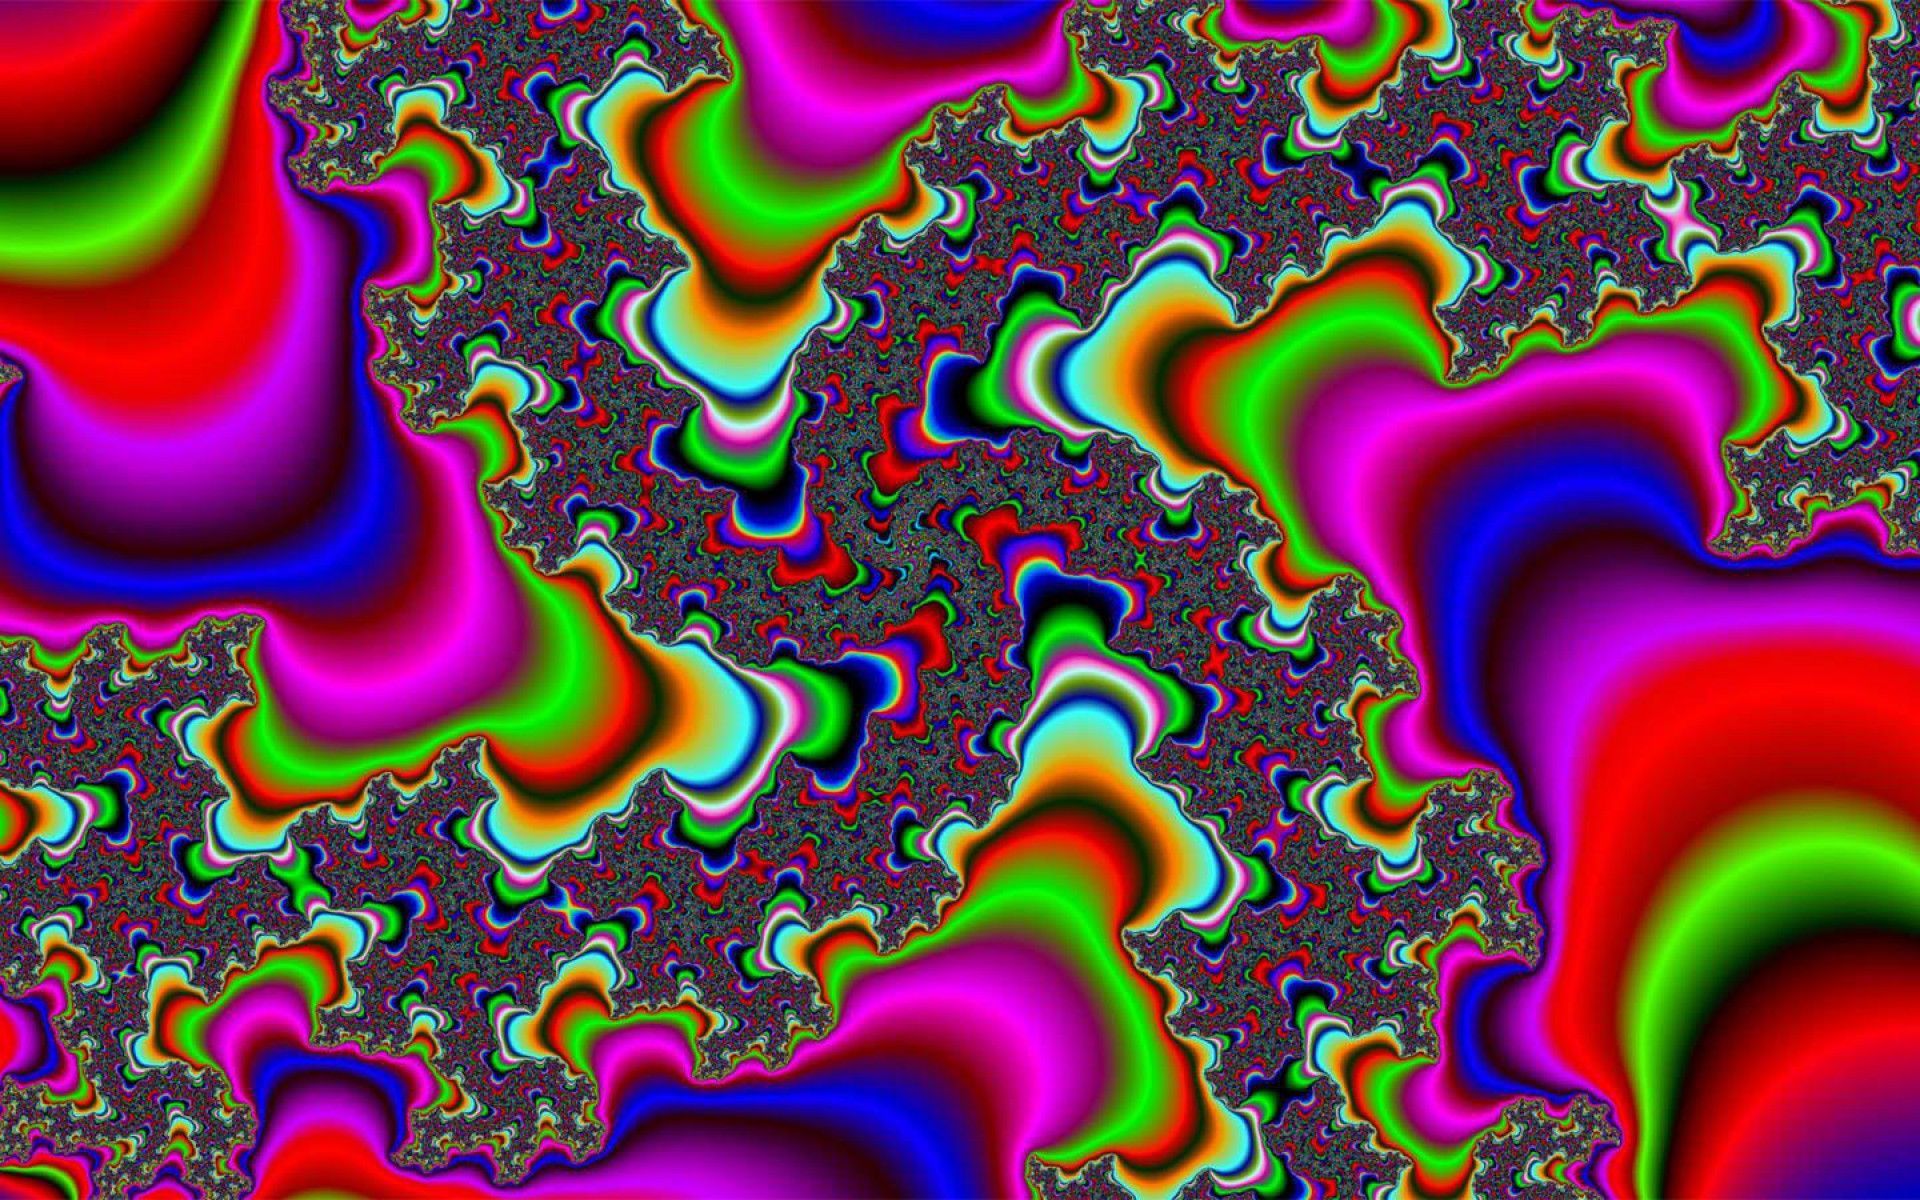 Trippy Images